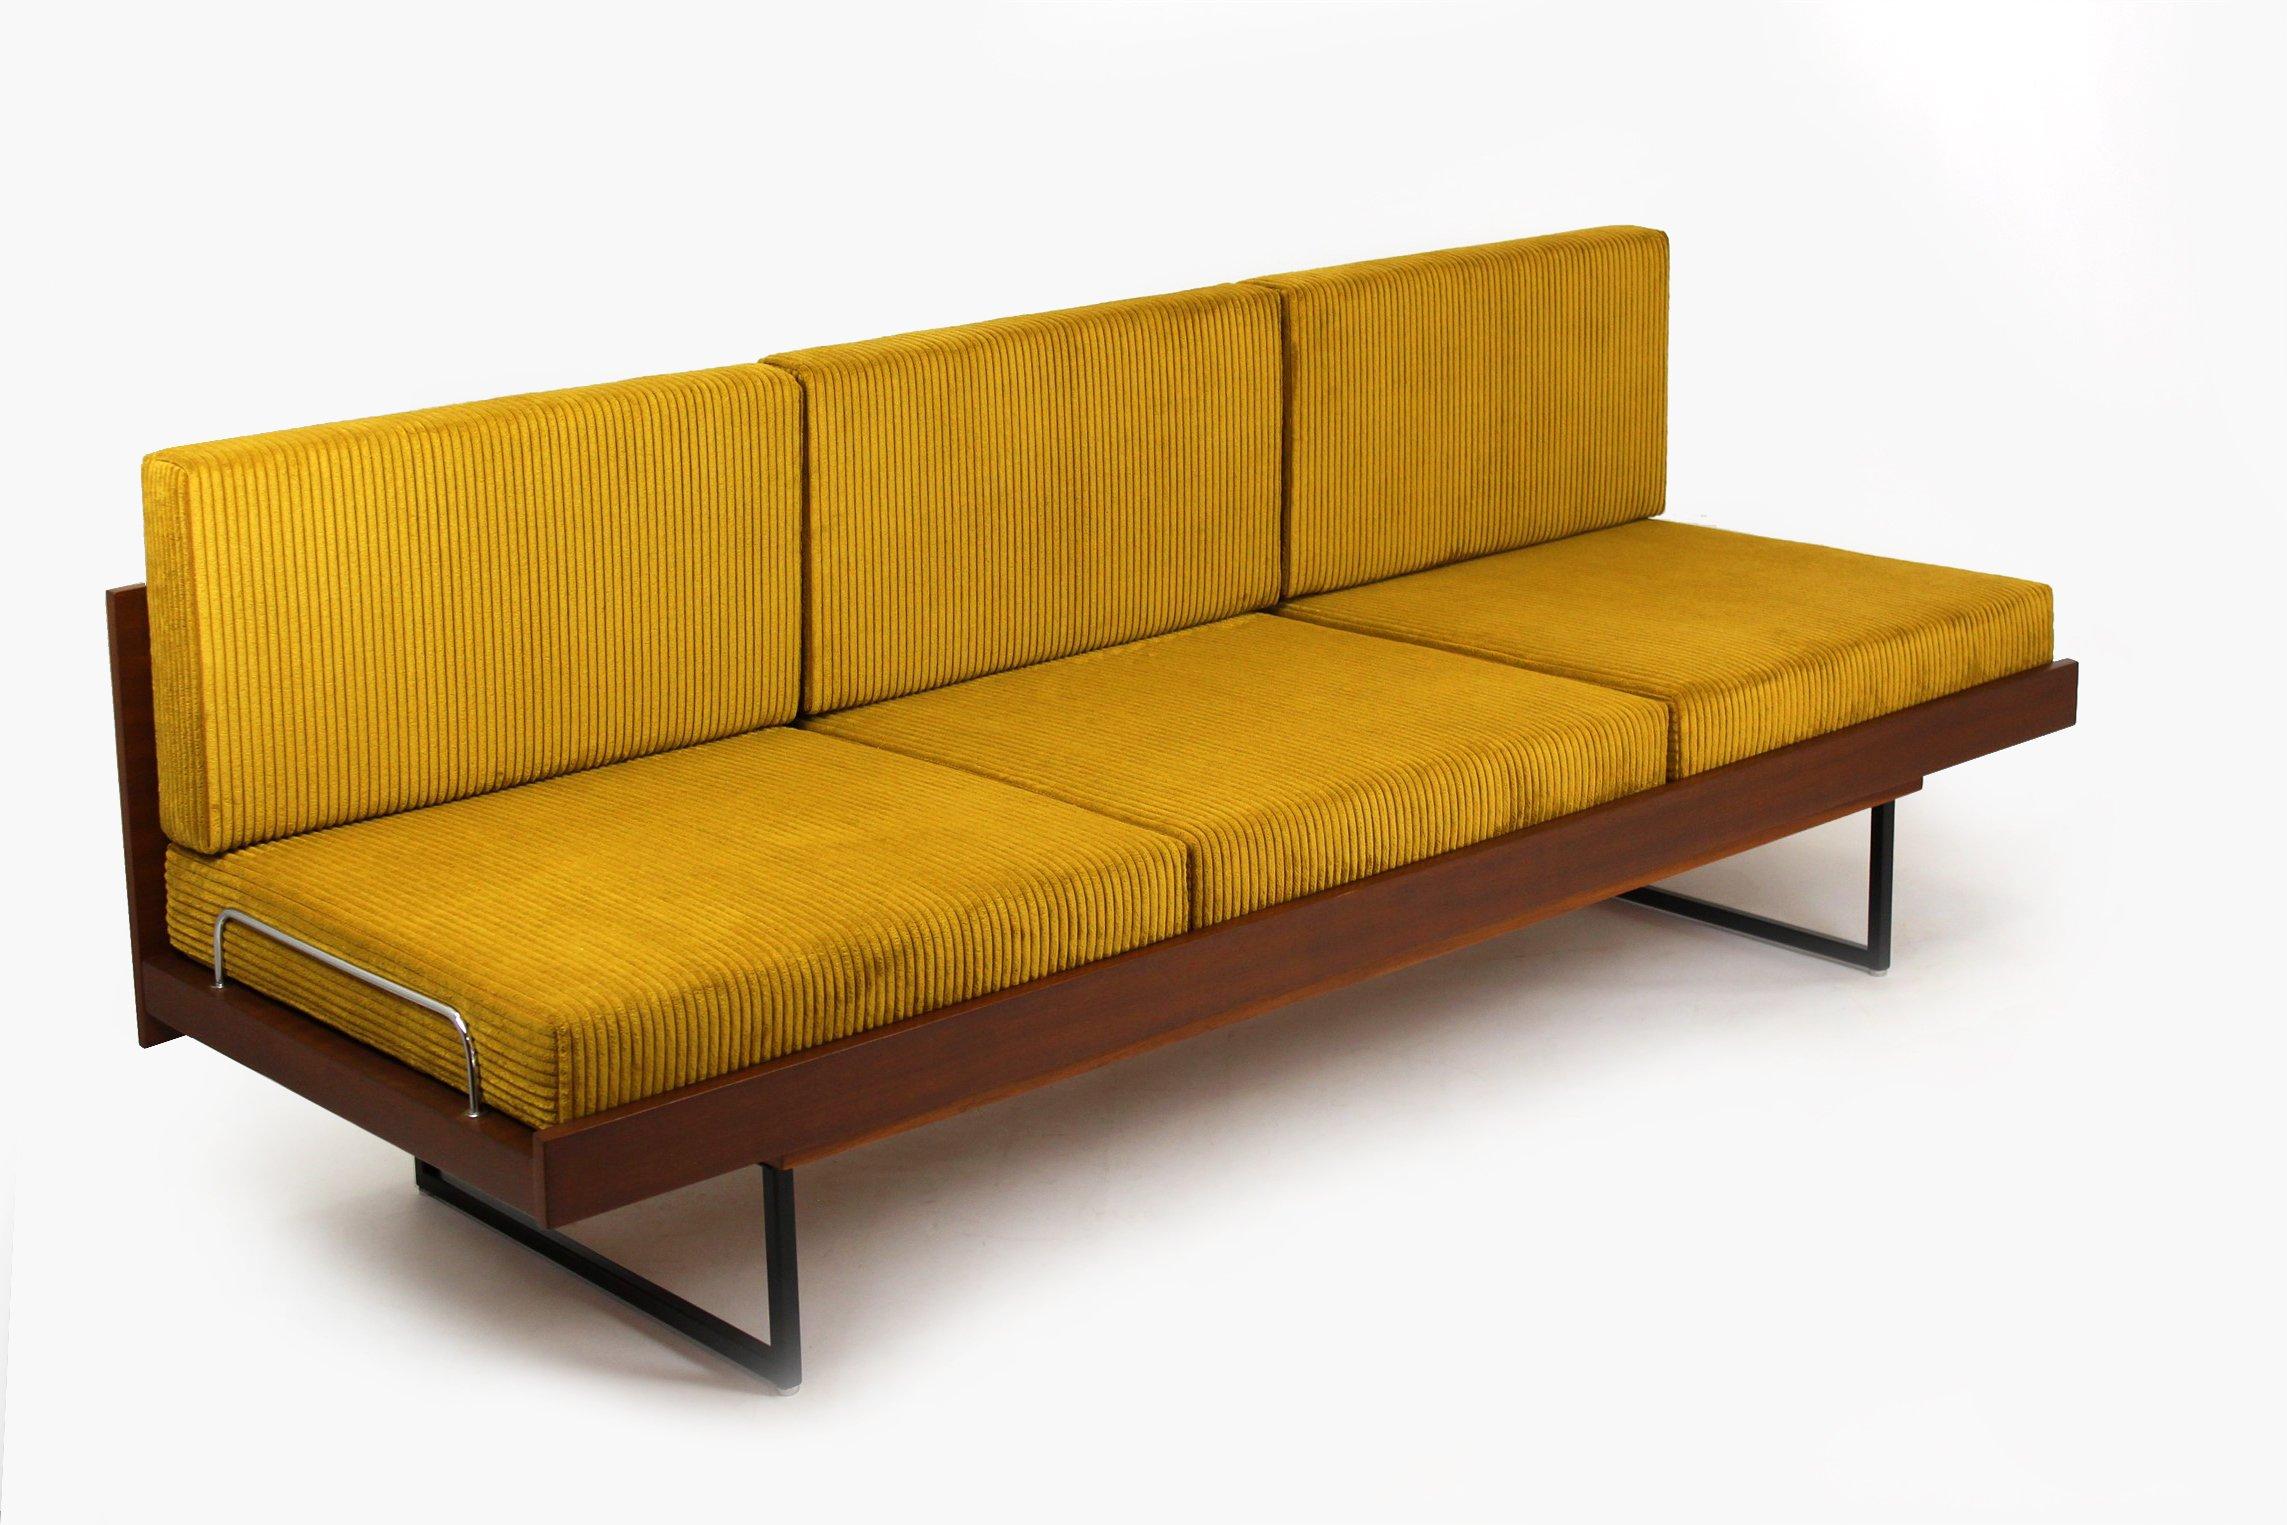 Steel Restored Mid Century Sofa Daybed With Coffee Table from Interier Praha, 1960s For Sale